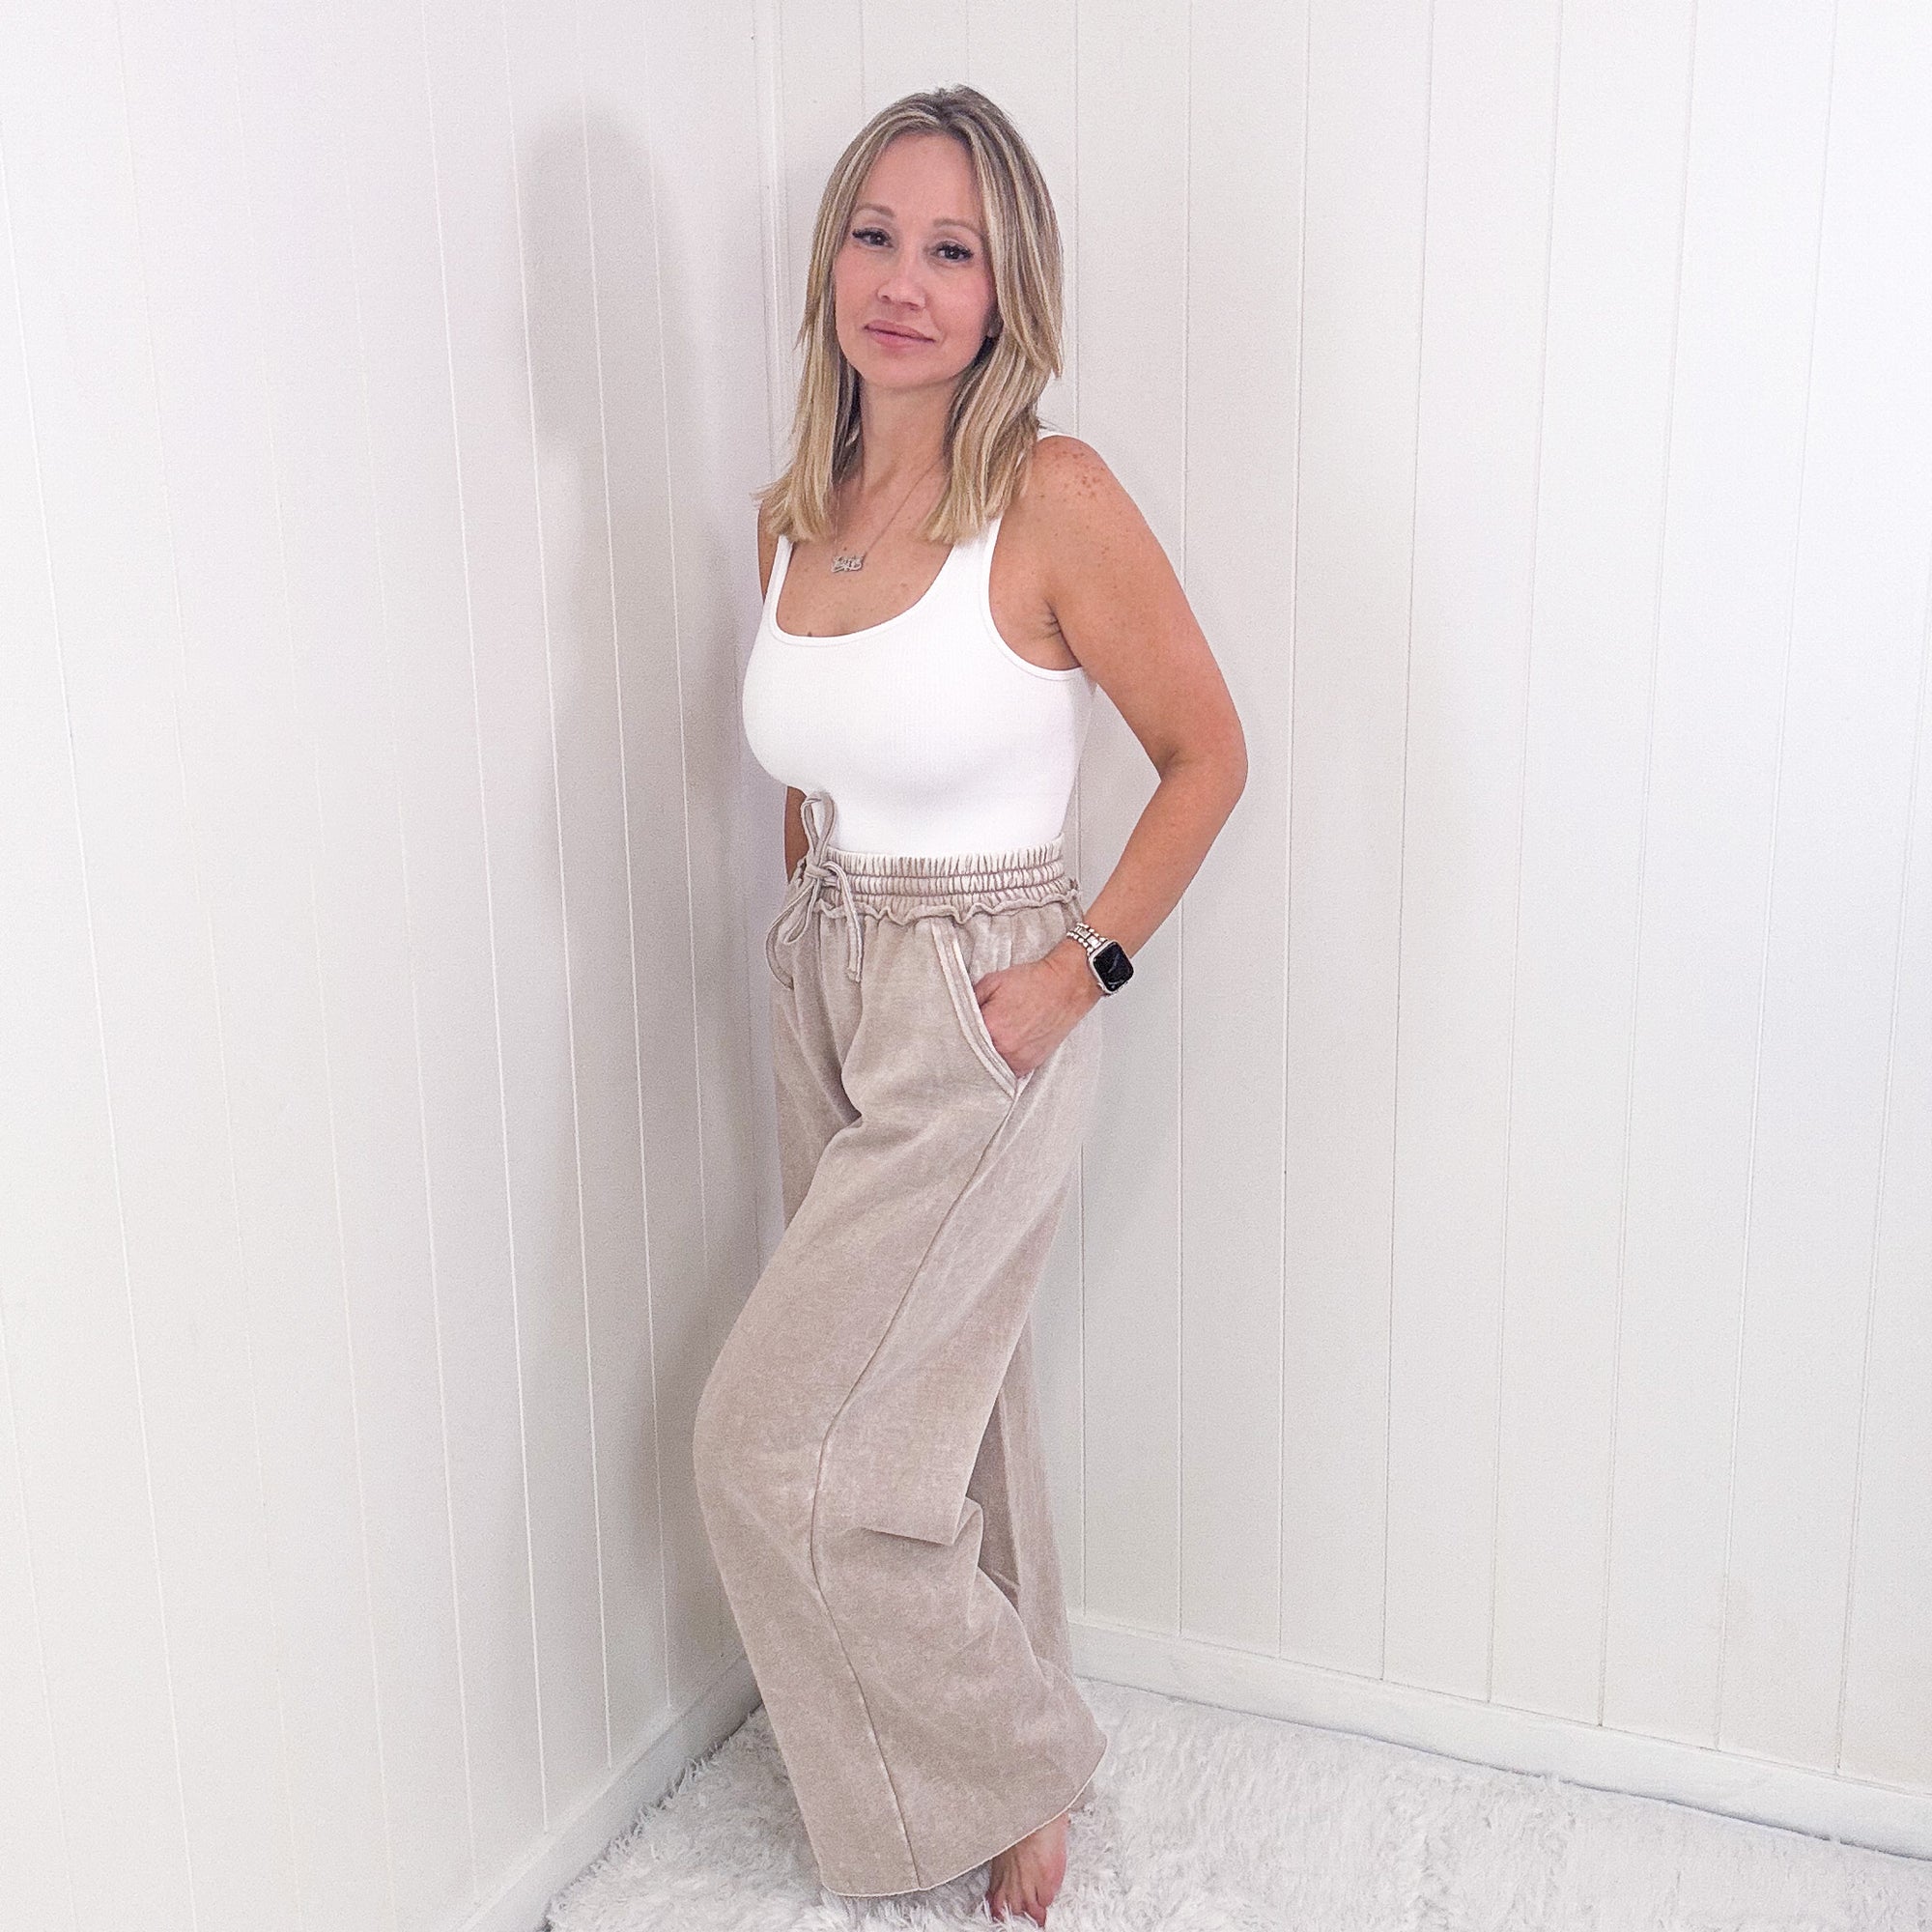 Relaxed on the Weekend Full Length Palazzo Pants in 5 Colors - Boujee Boutique 